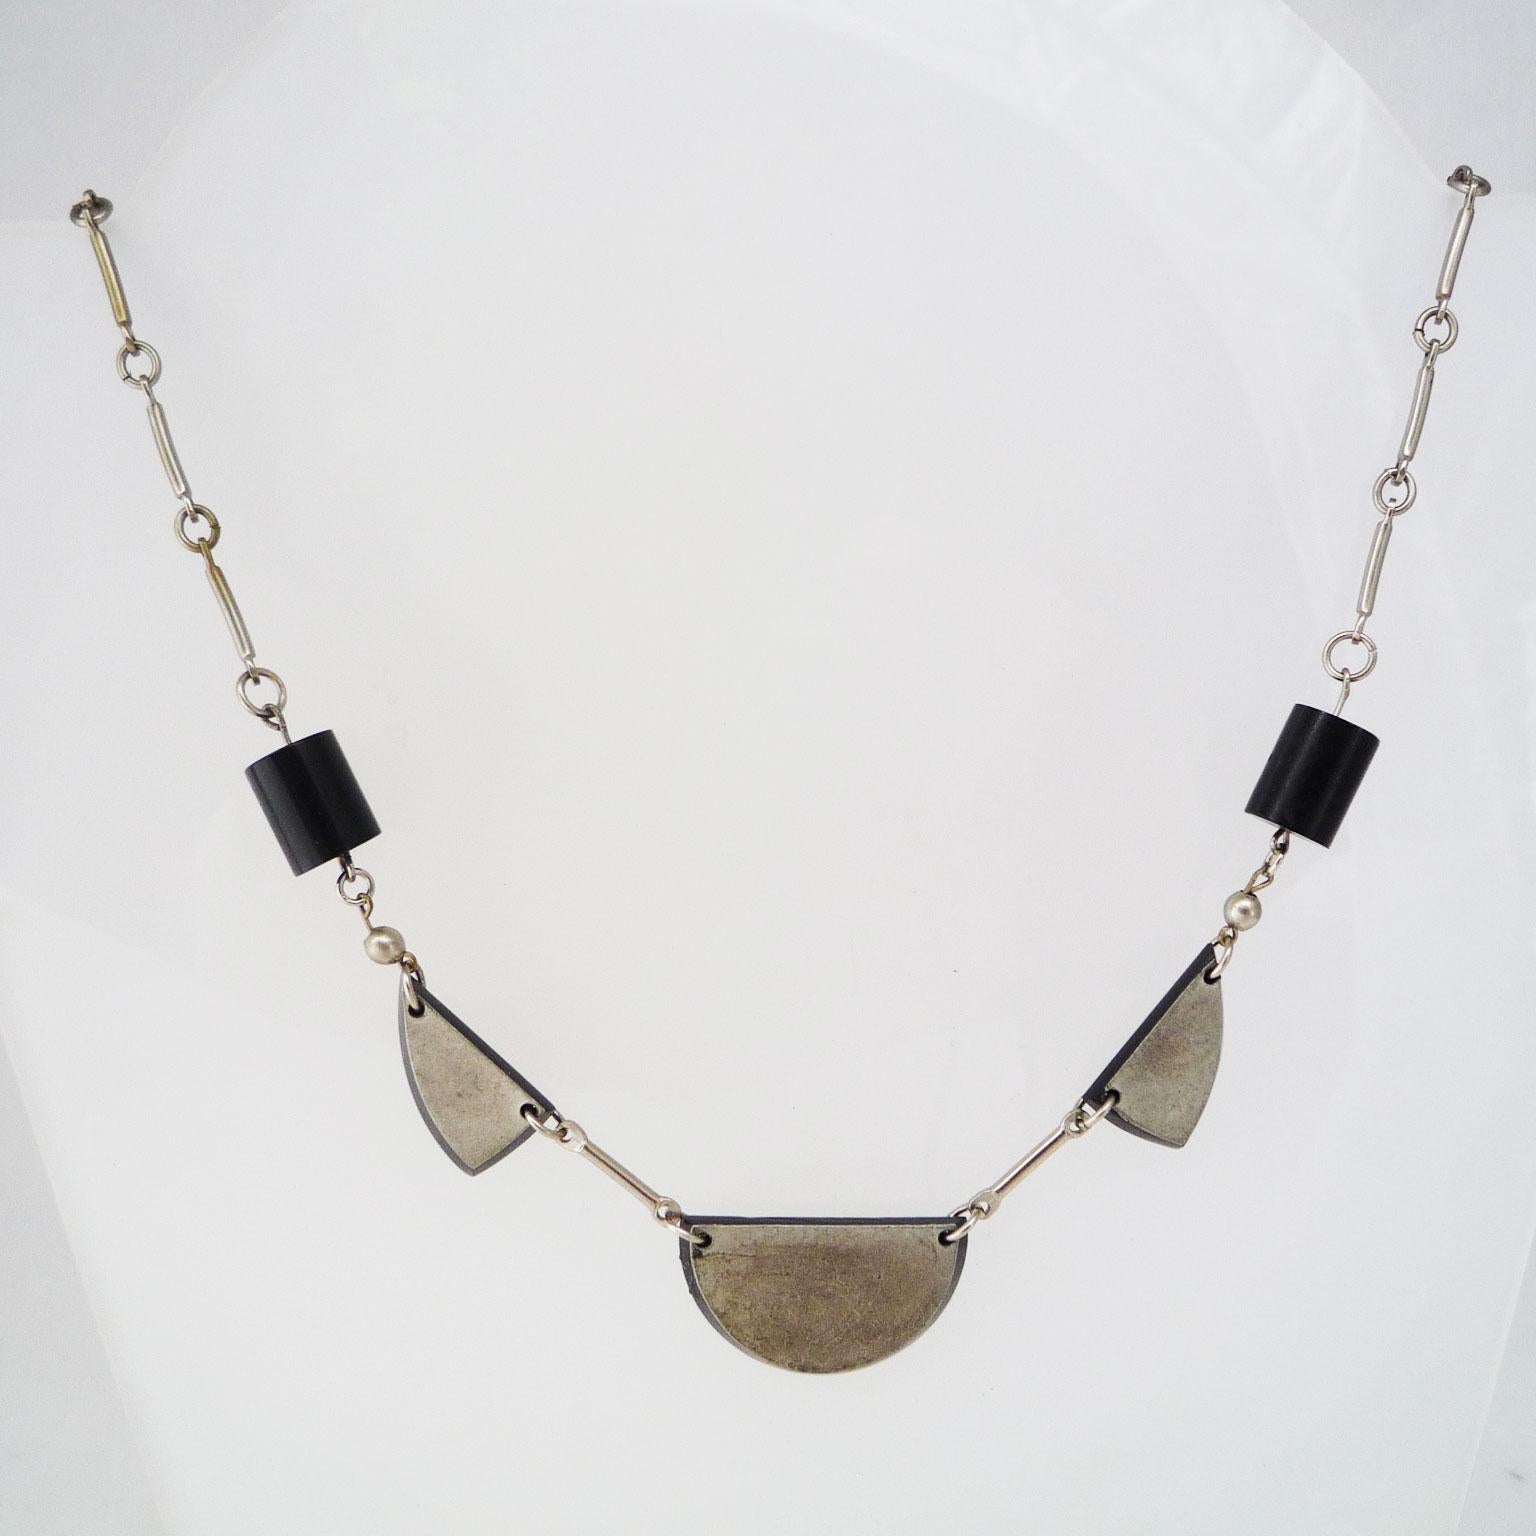 Collier in Chrome and Galalith by Jakob Bengel, around 1920/30 Damen